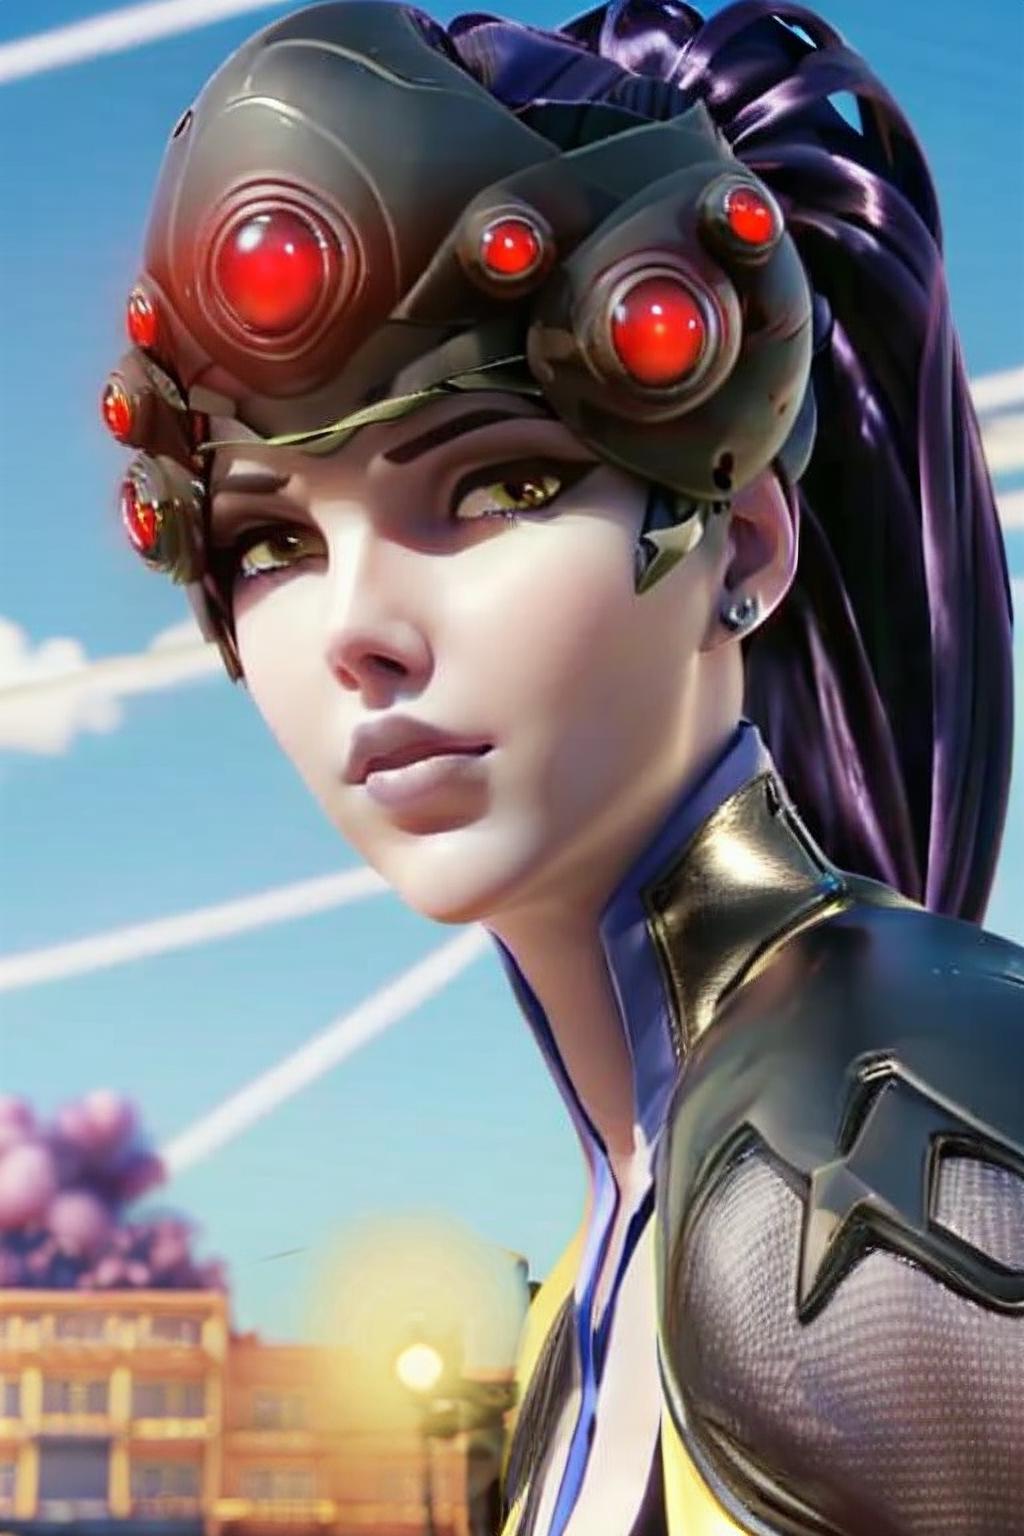 Widowmaker image by Entimesis